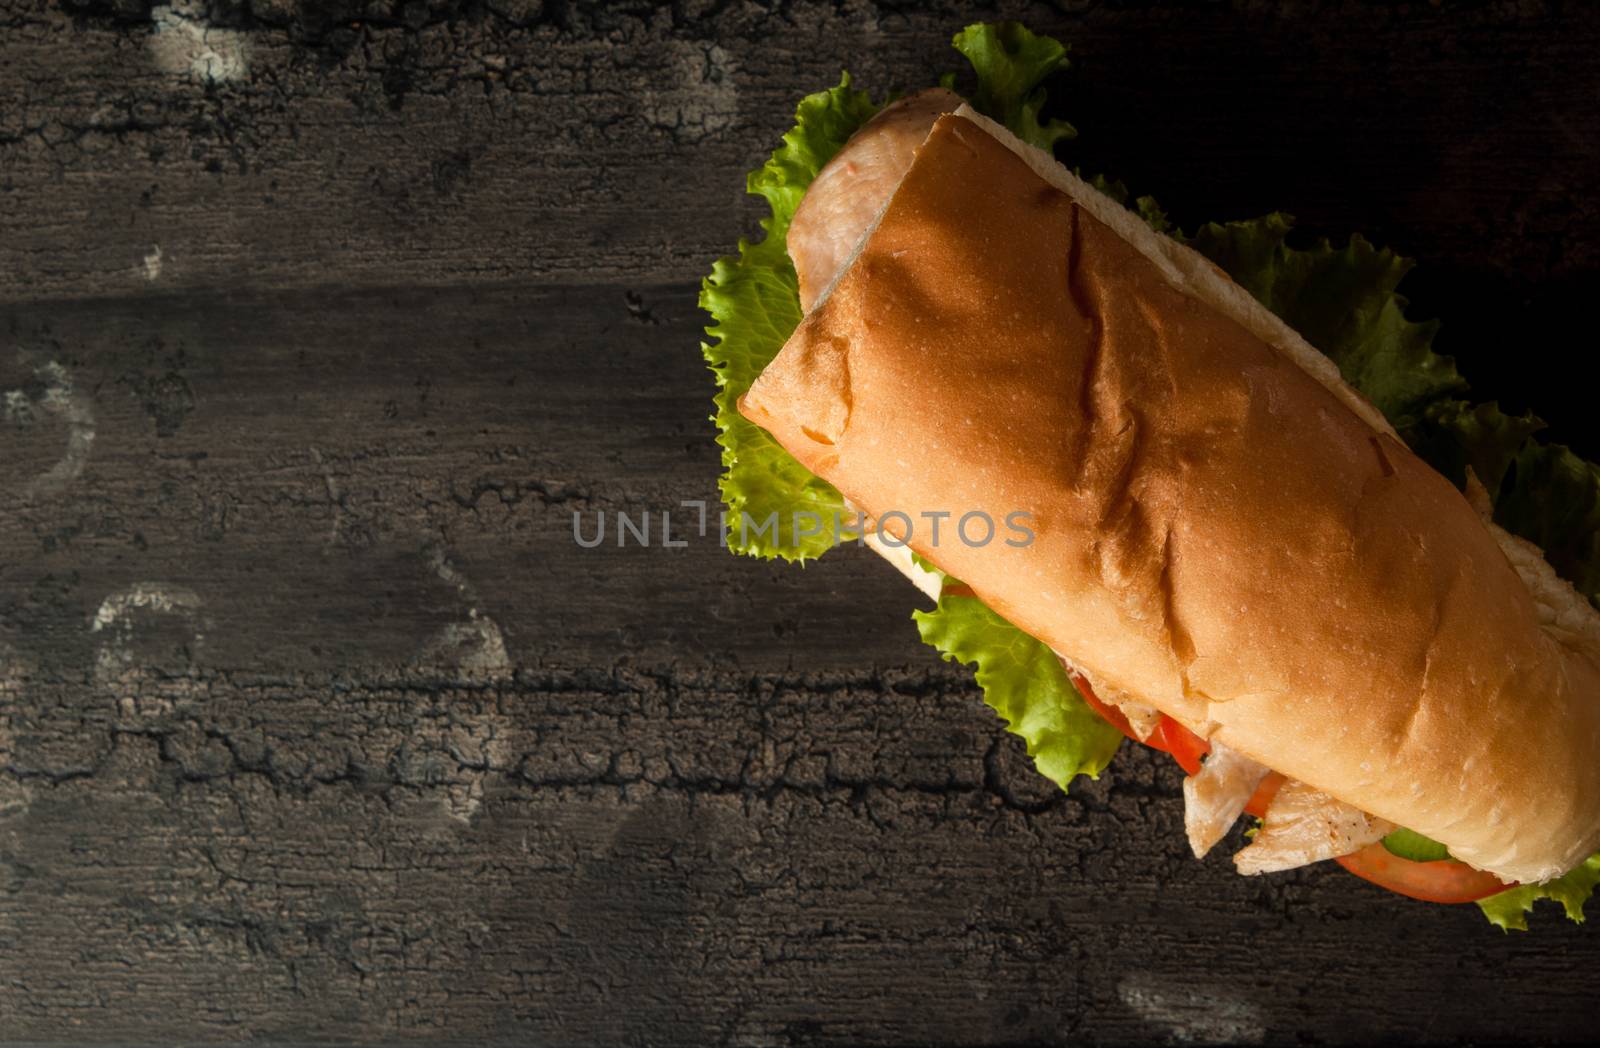 cheeseburger on a wooden surface by A_Karim